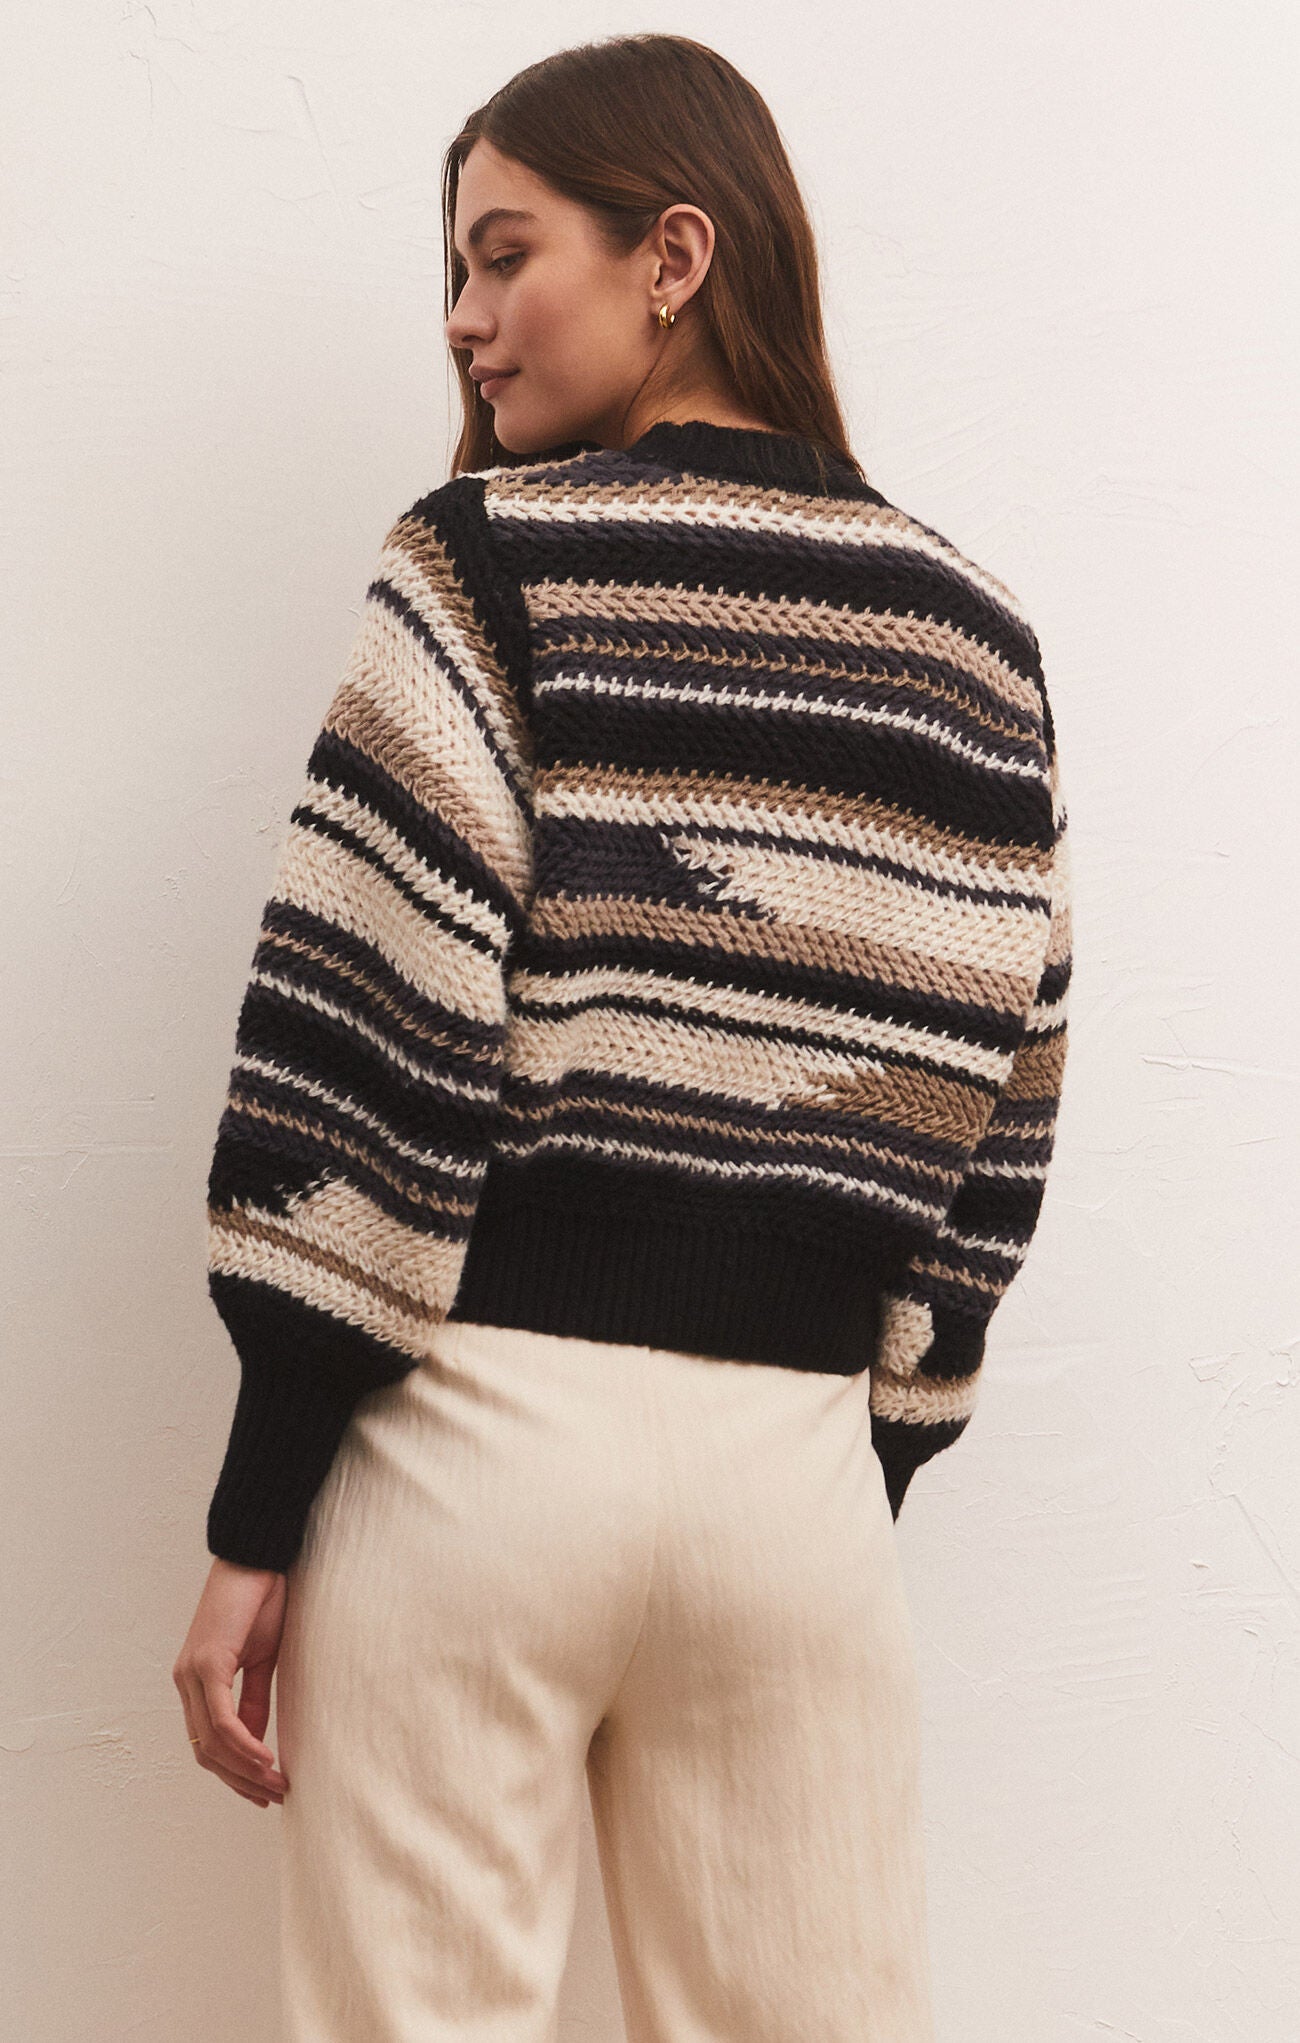 Aswheville Stripe Sweater in 2 colors  - Z Supply